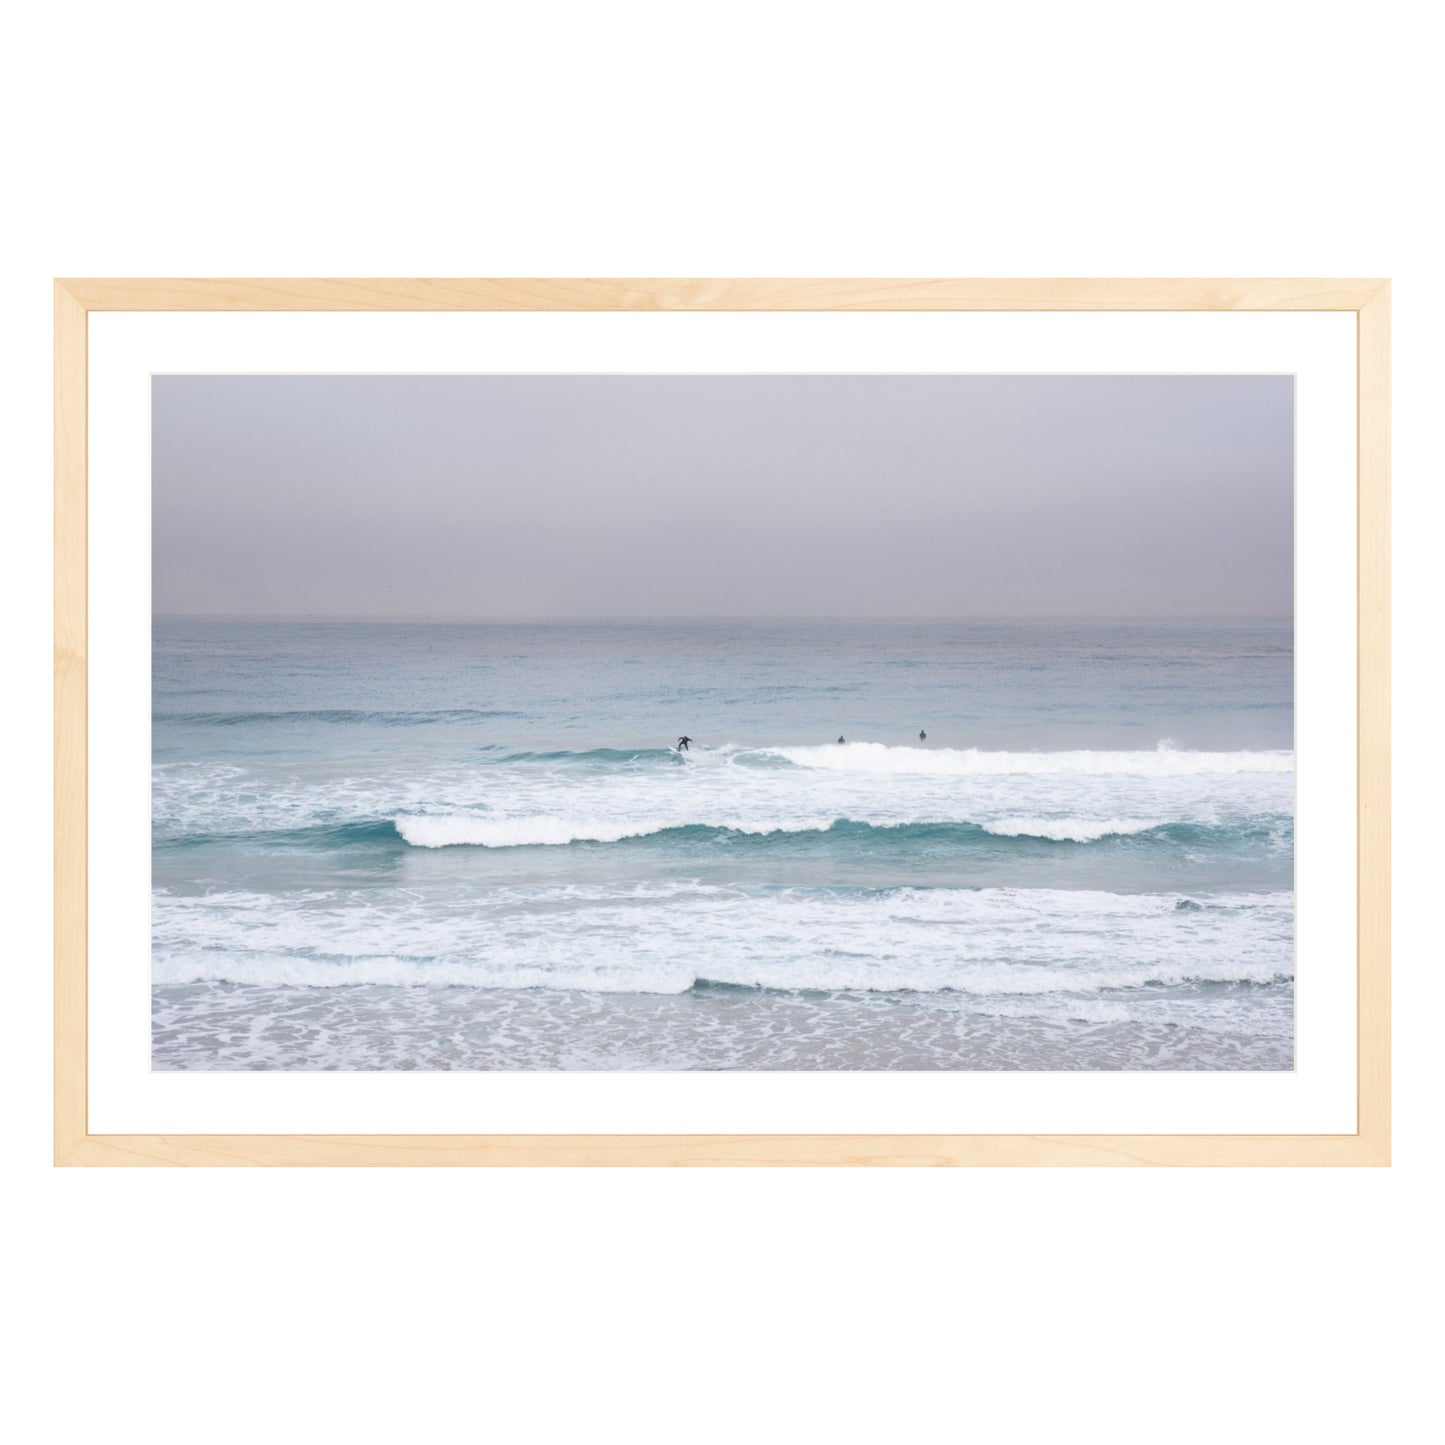 Photograph of surfers on Carmel coast, California framed in natural wood with white mat